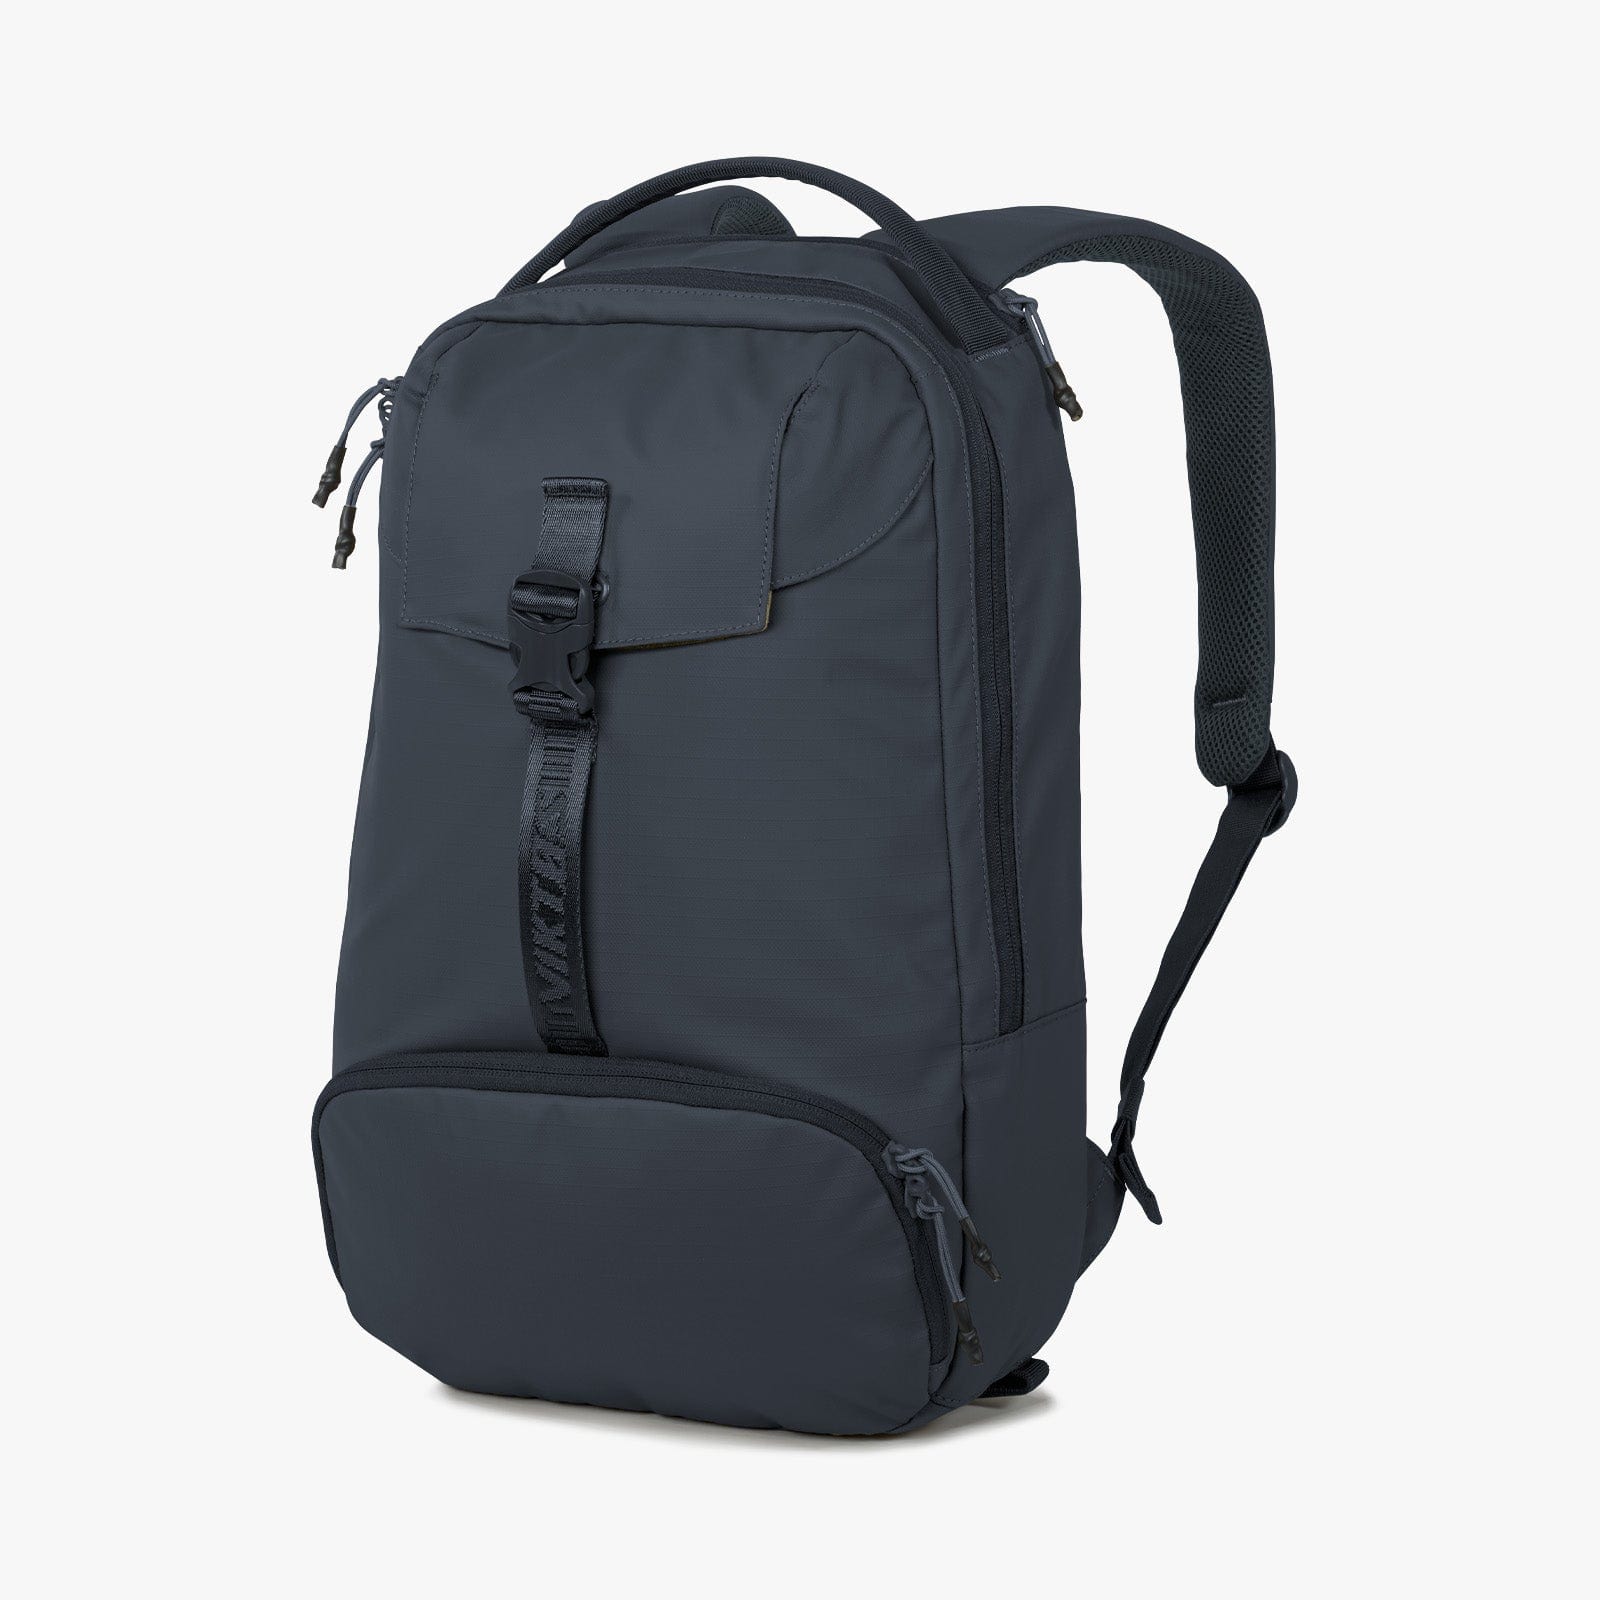 Viktos Counteract 15 Backpack